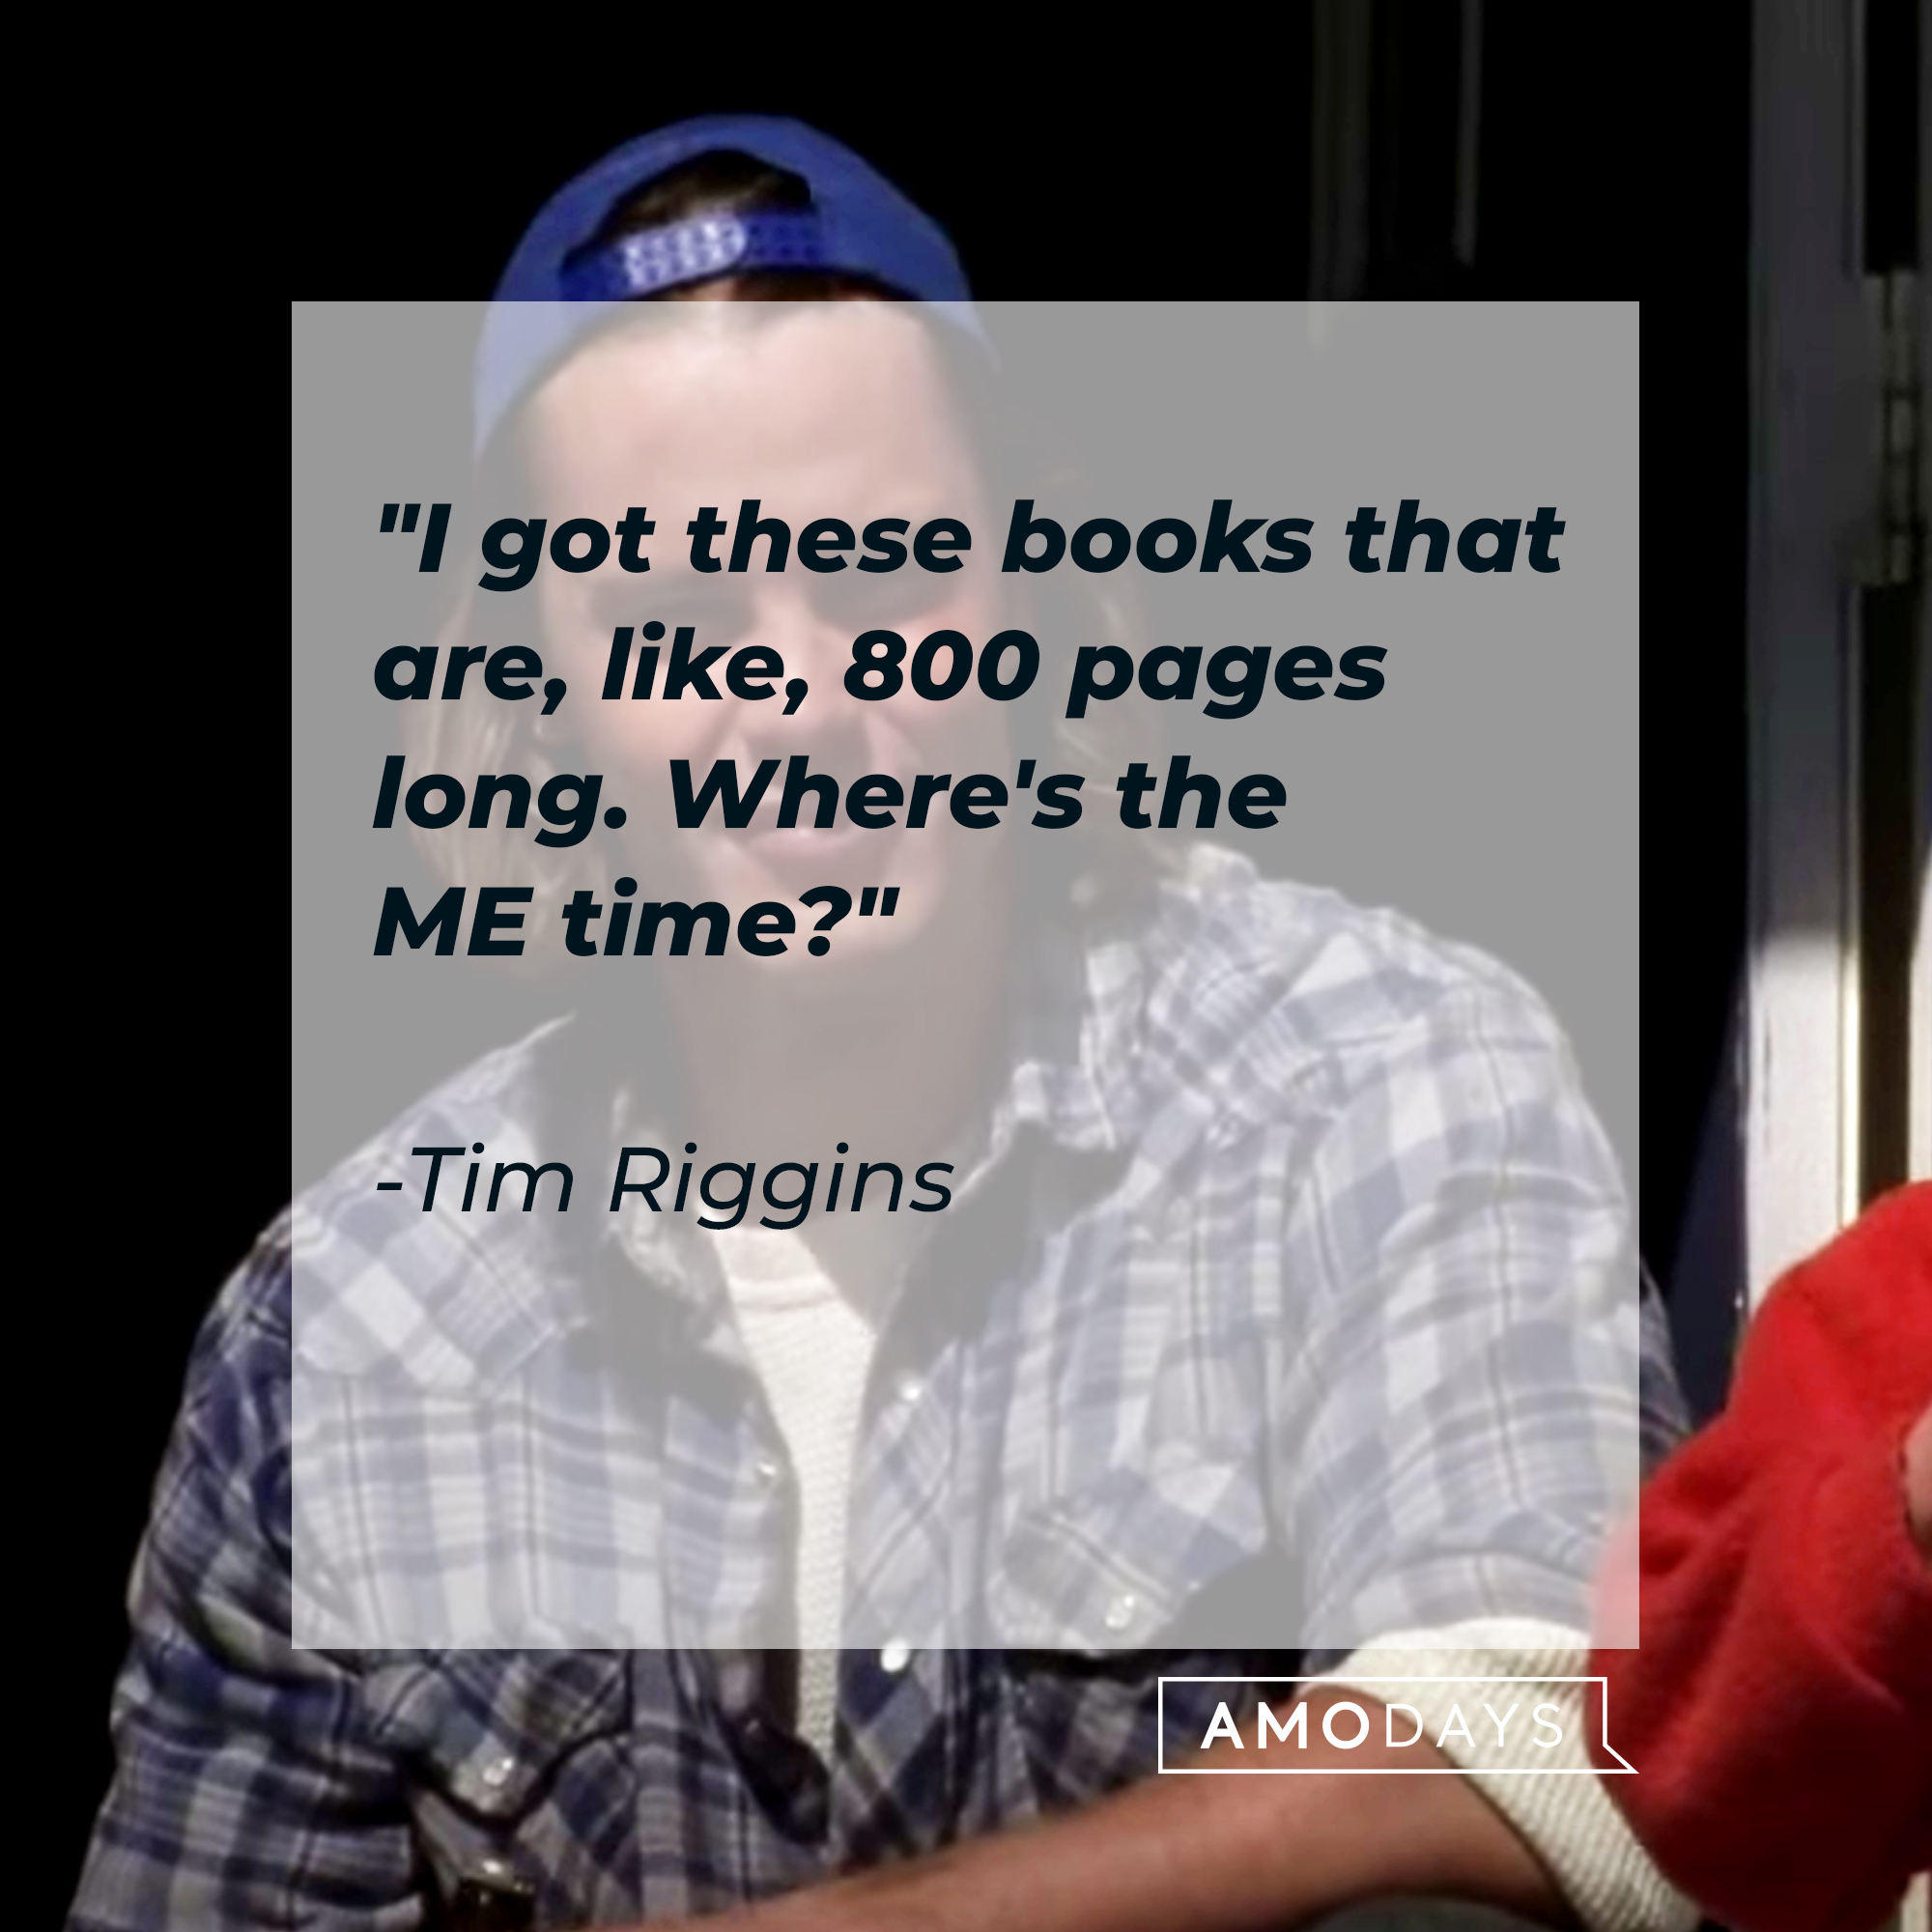 Tim Riggins' quote, "I got these books that are, like, 800 pages long. Where's the ME time?" | Source: Facebook/fridaynightlights